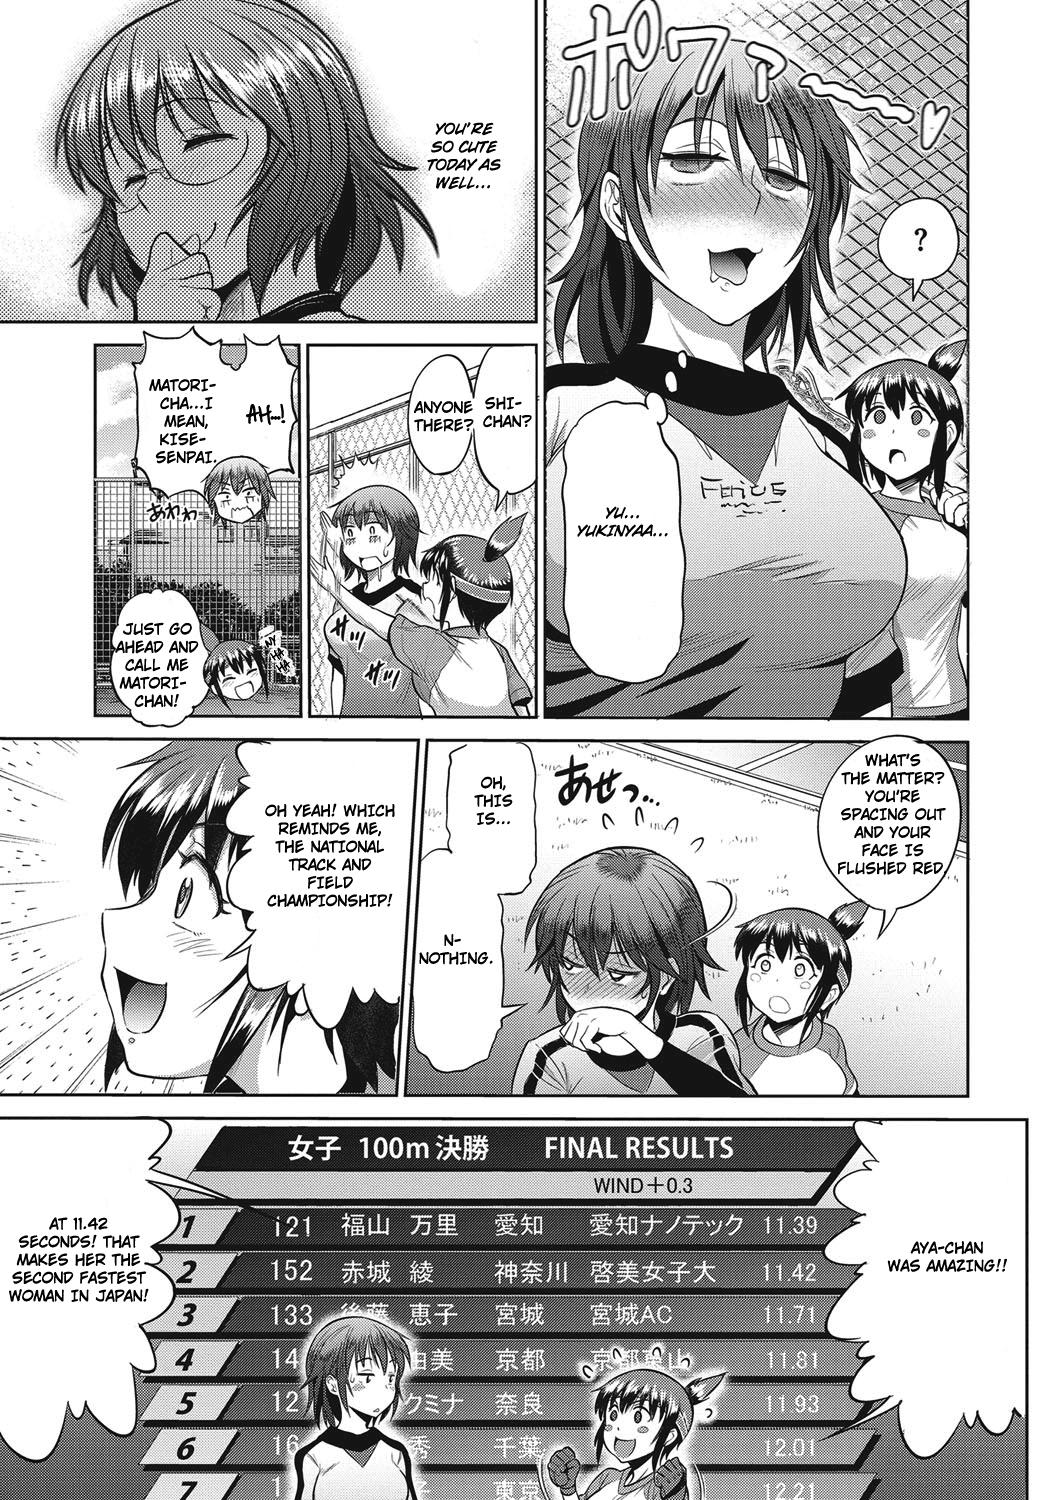 Whore [DISTANCE] Joshi Lacu! - Girls Lacrosse Club ~2 Years Later~ Ch. 3 (COMIC ExE 04) [English] [TripleSevenScans] [Digital] Gritona - Page 11